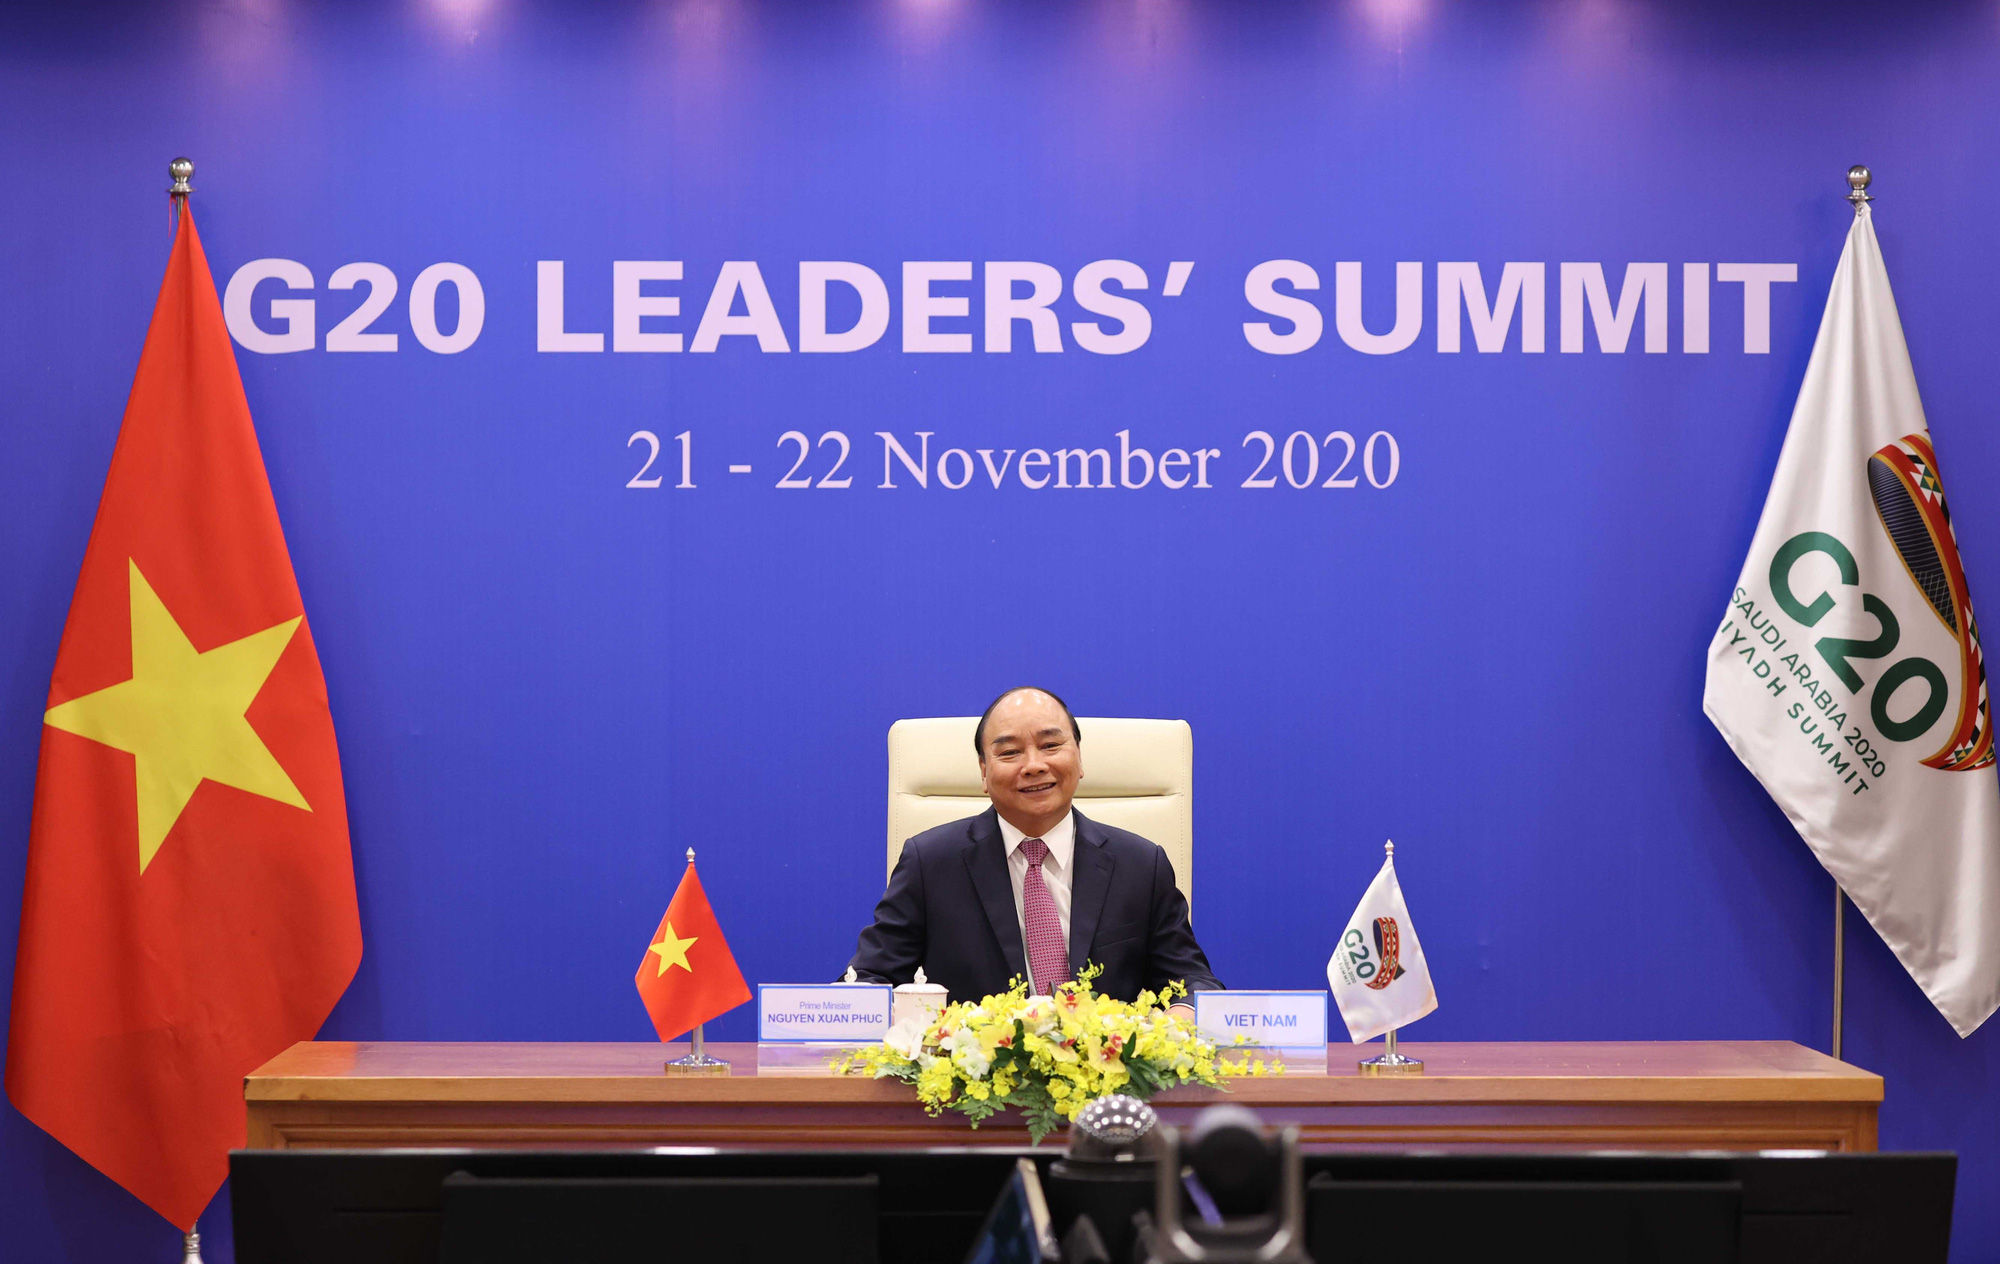 Vietnam premier calls for global solidarity to overcome COVID-19 at G20 Summit